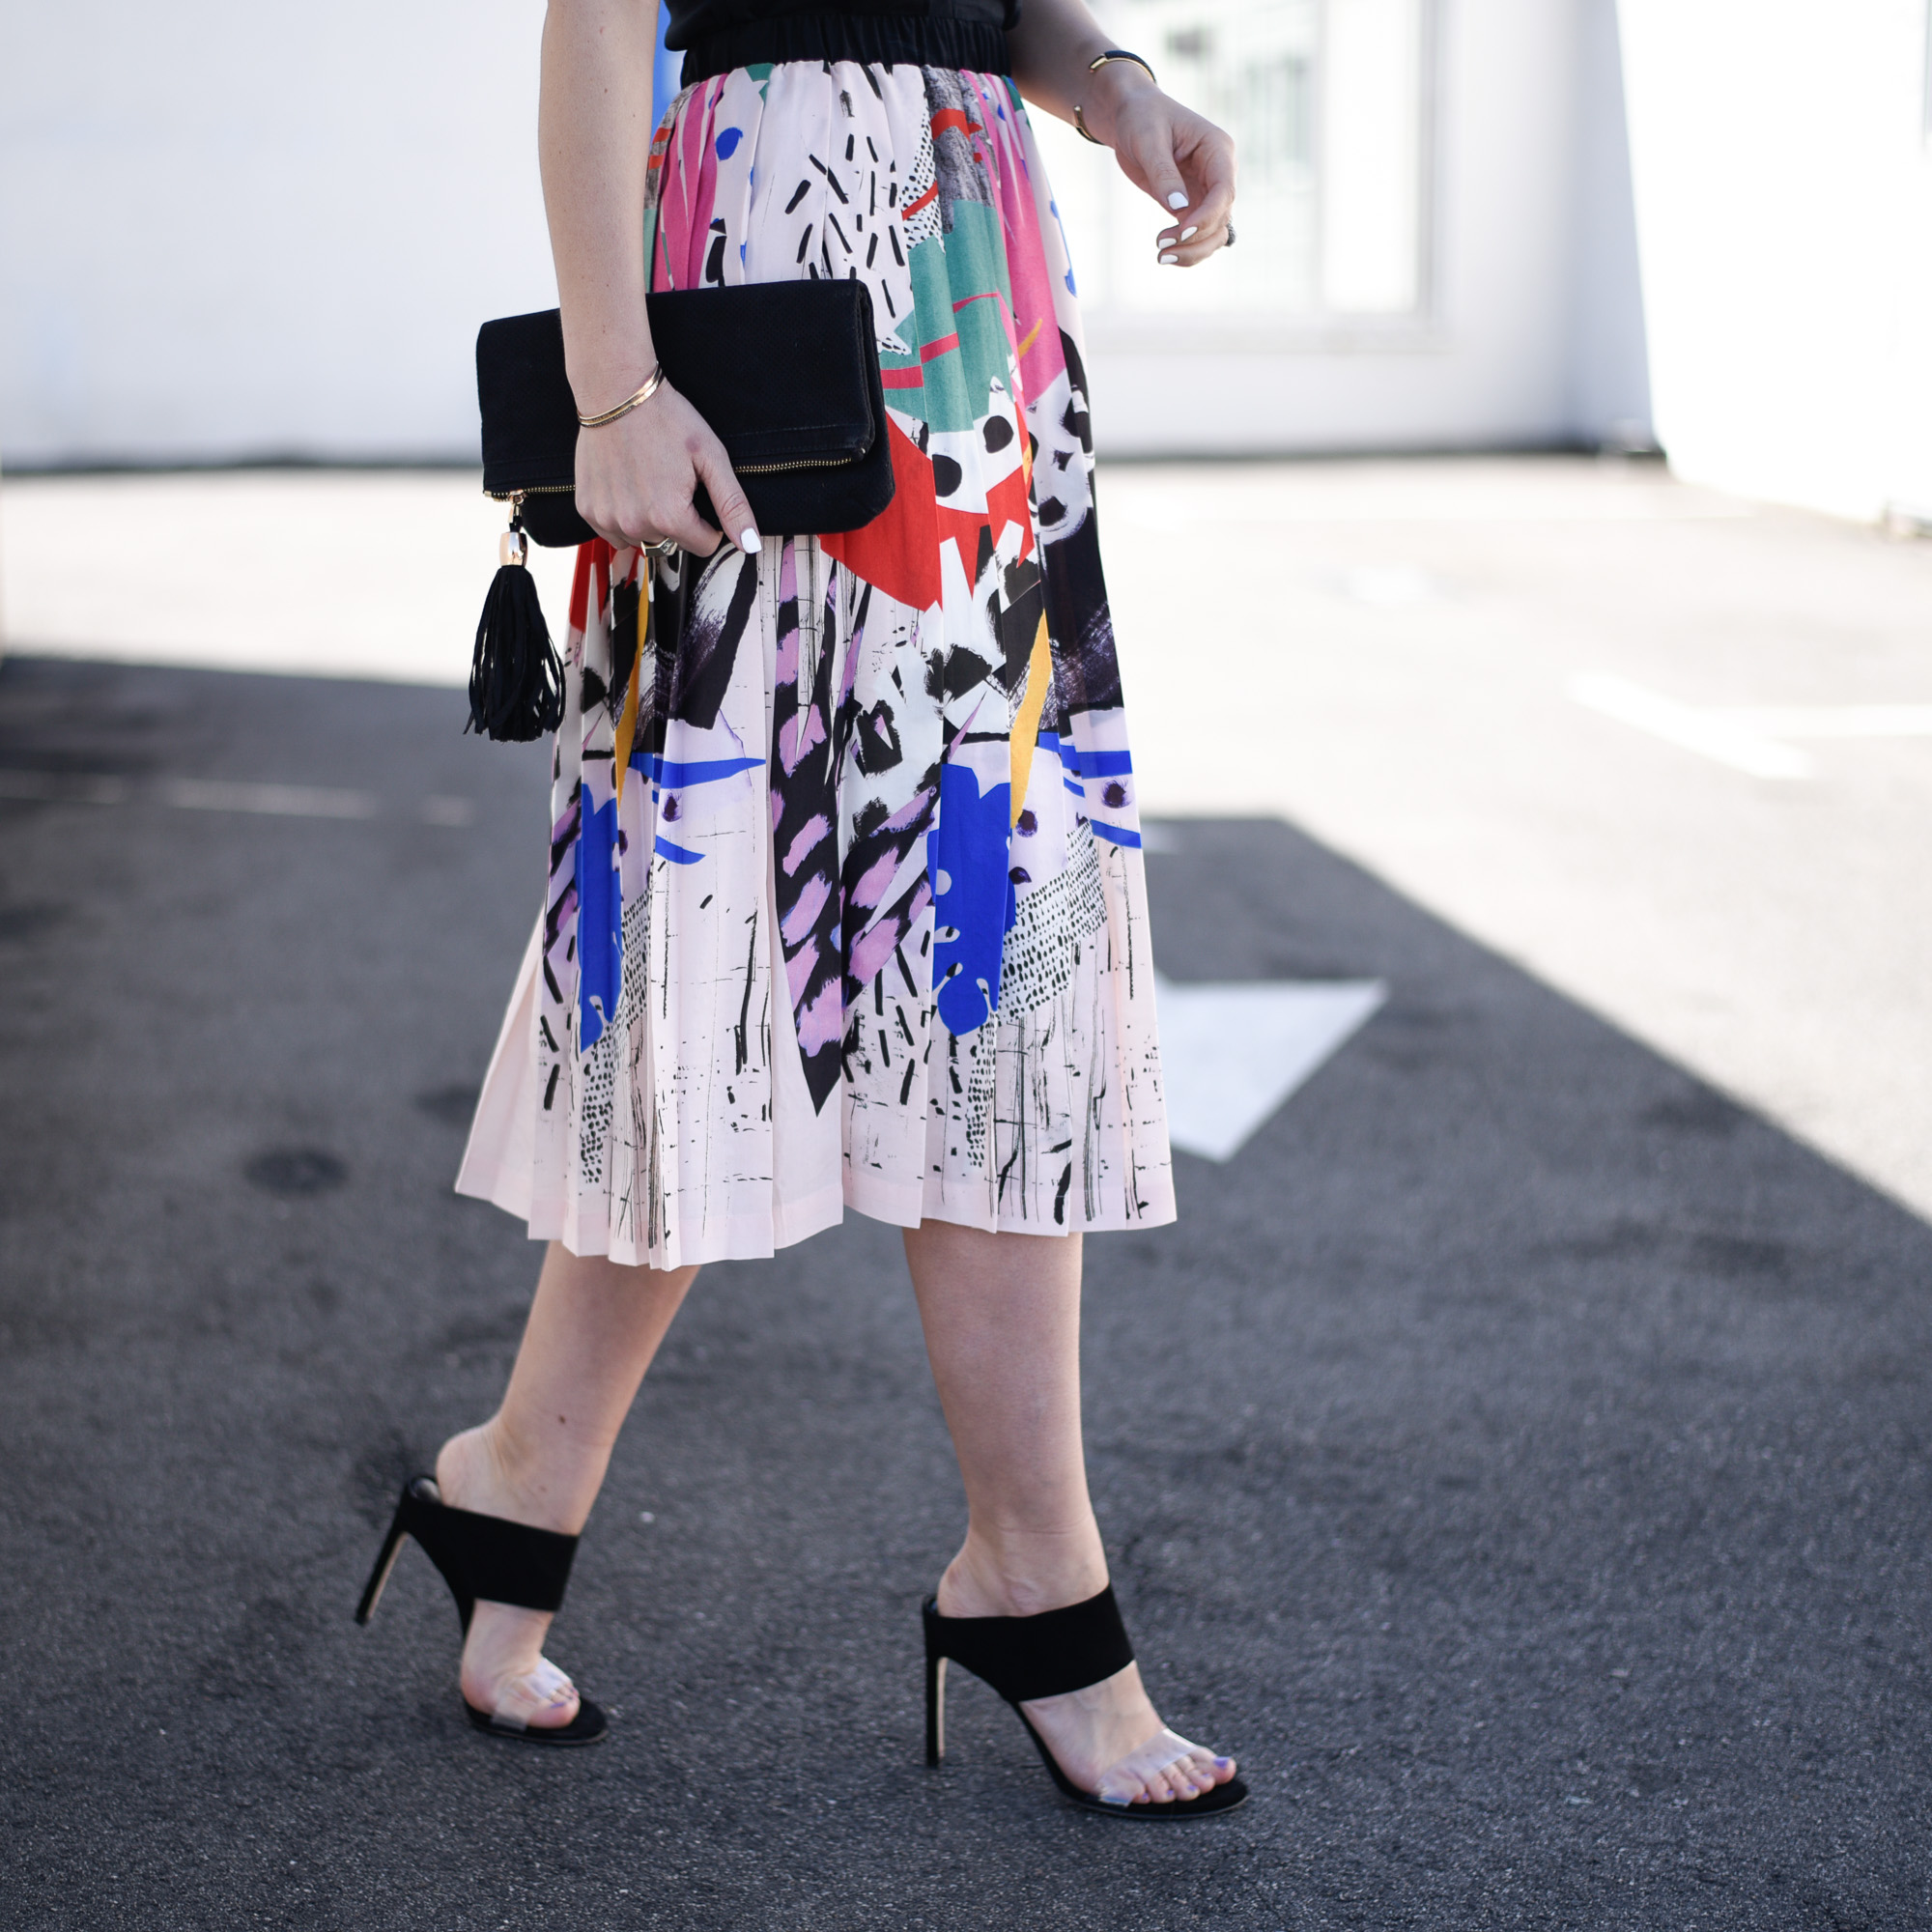 Pleated and painted colorful midi skirt perfect for spring at the office. 